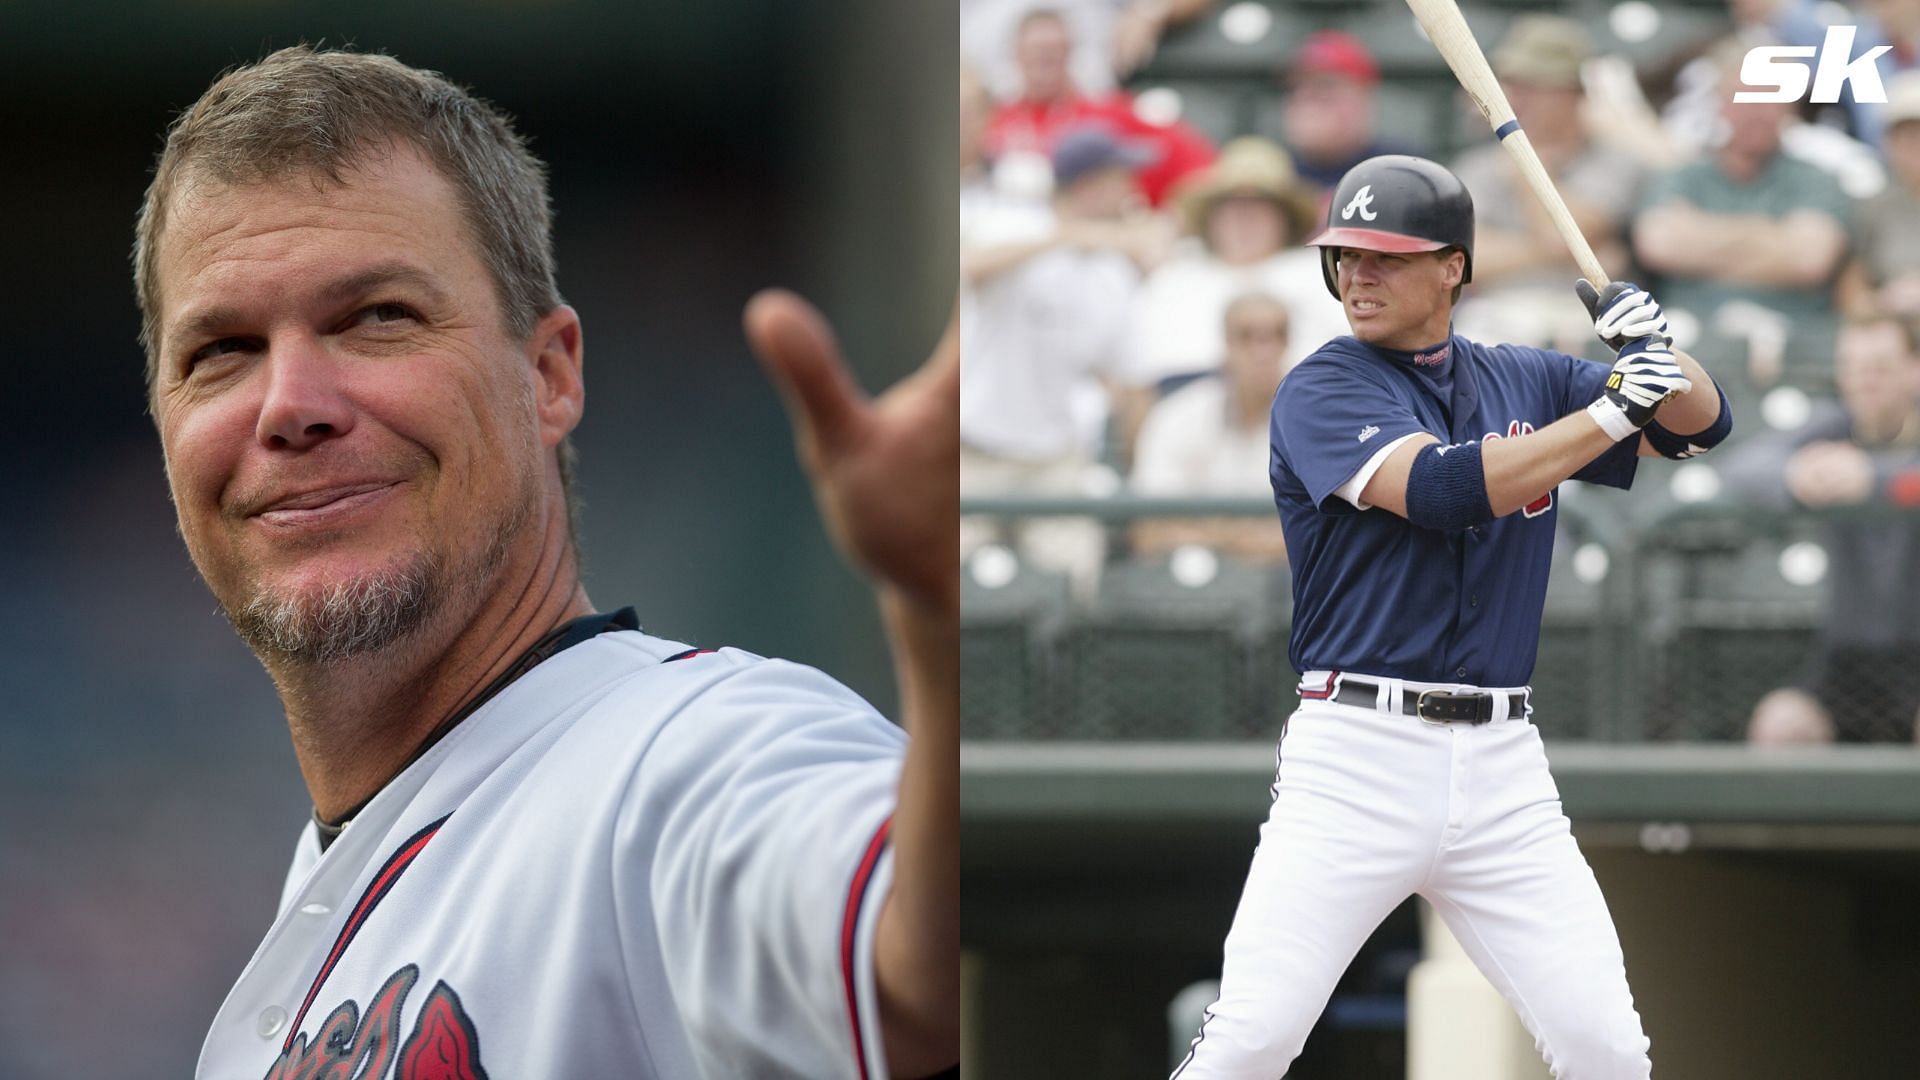  Chipper Jones opens up about what made him suspicious about Phillies stars using PEDs in his book Ballplayer&quot;